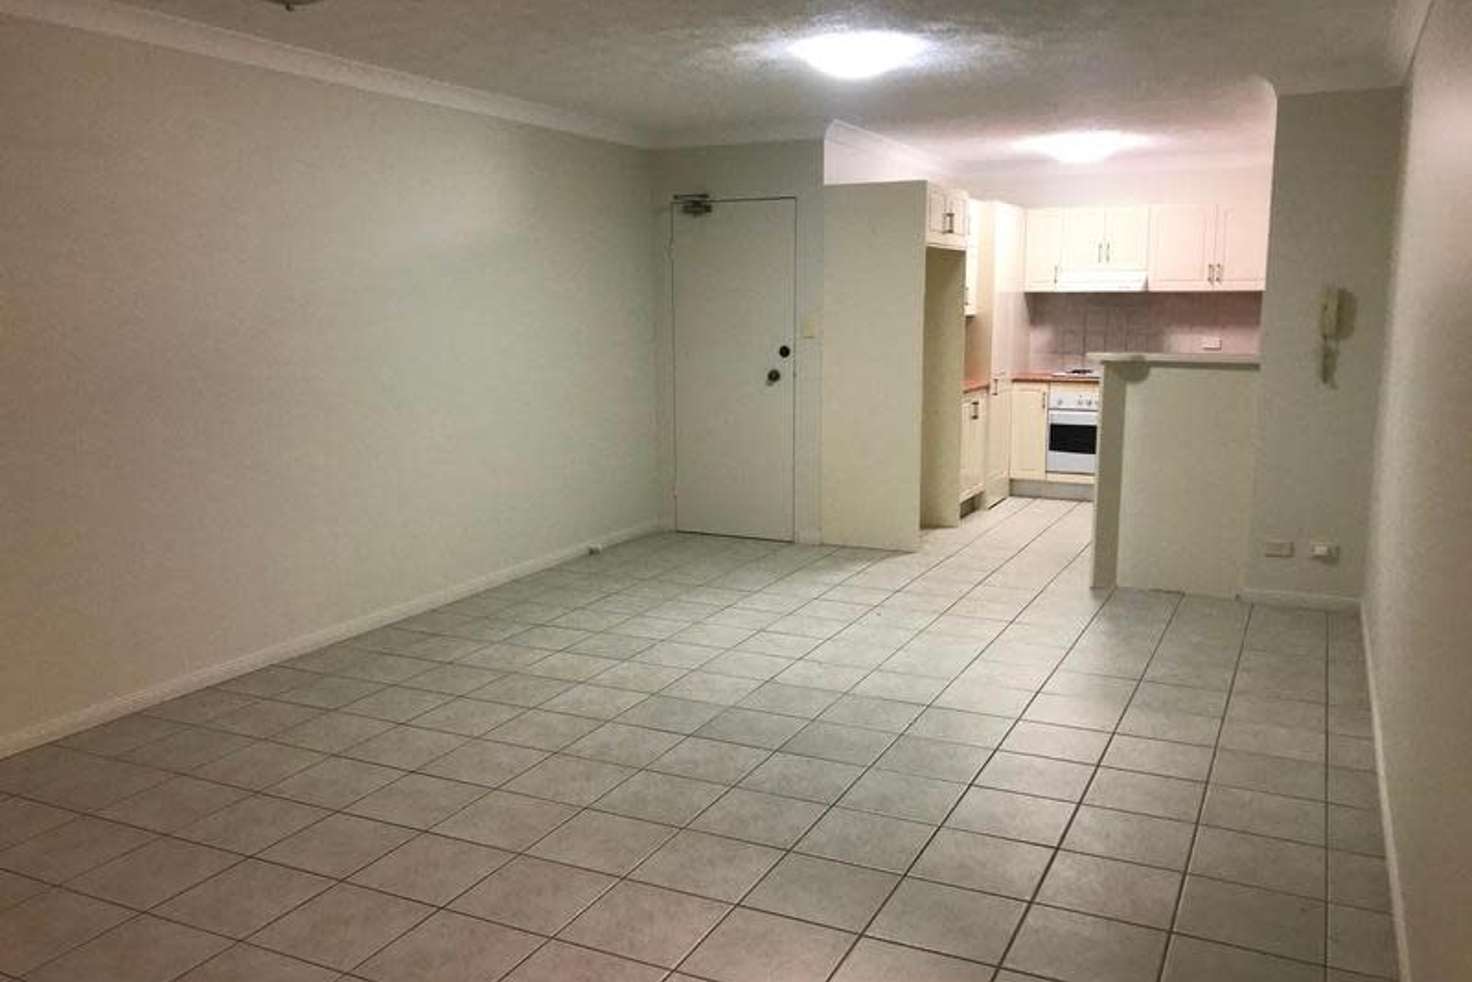 Main view of Homely unit listing, 2/21 Station Avenue, Enoggera QLD 4051